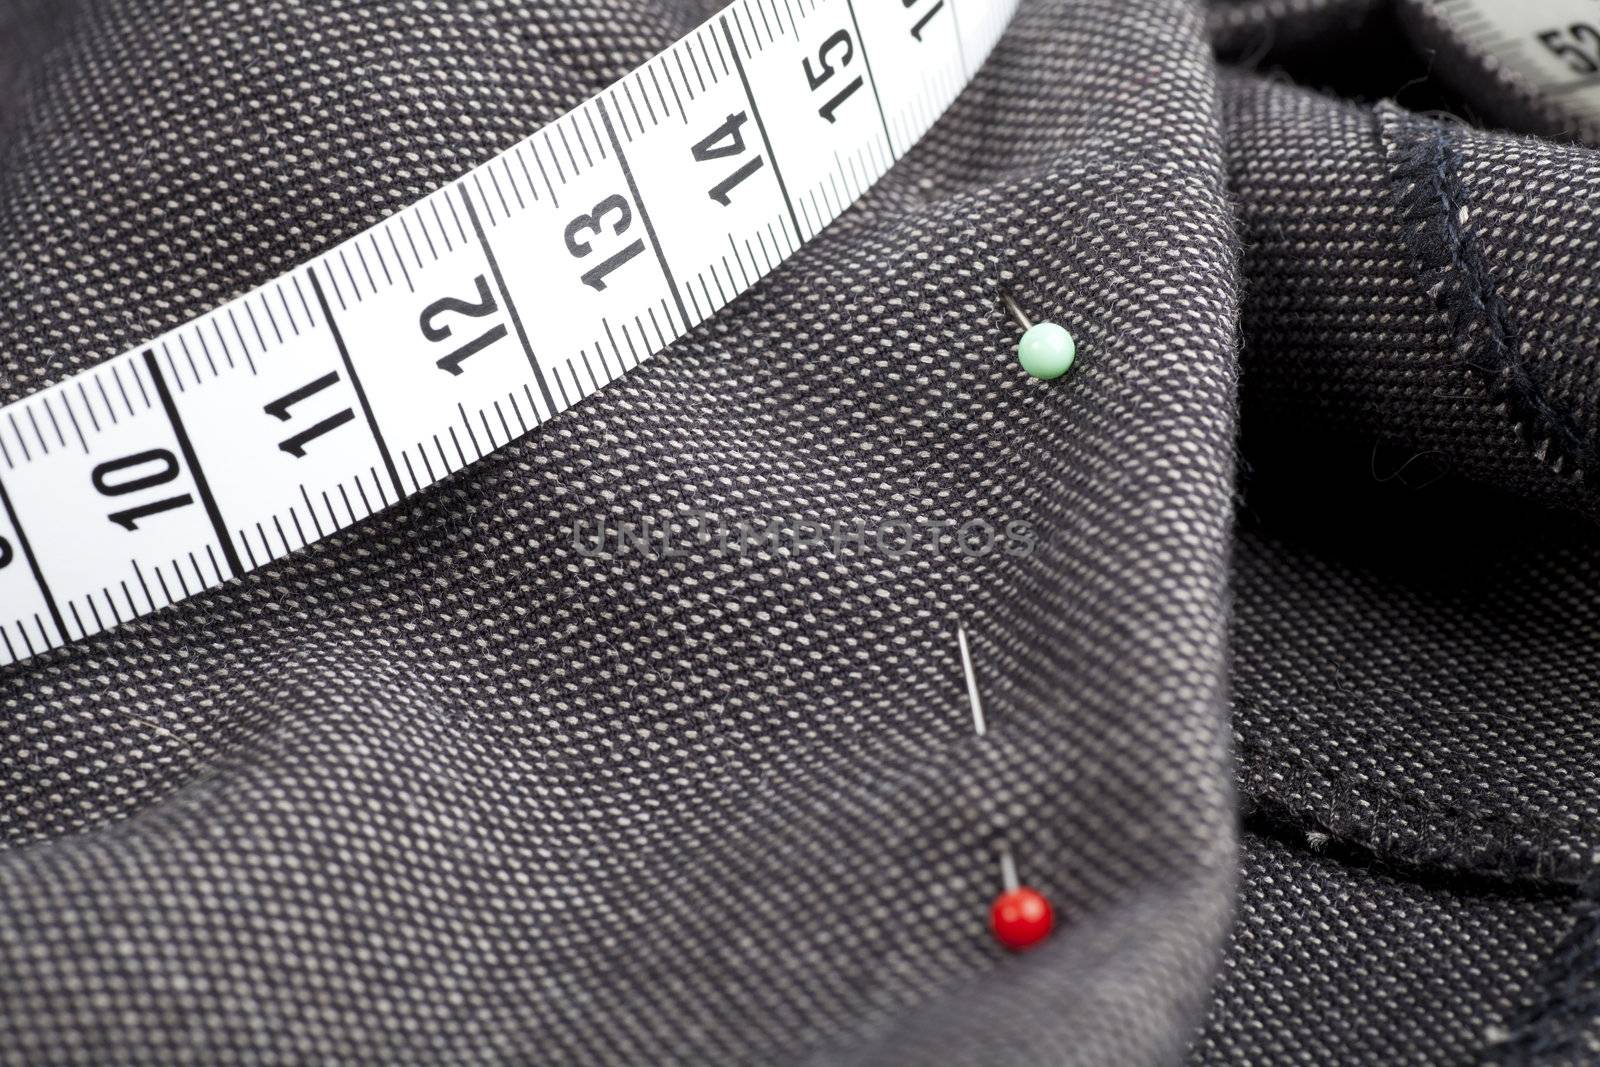 Pins and measuring tape on fabric, ready for sewing.